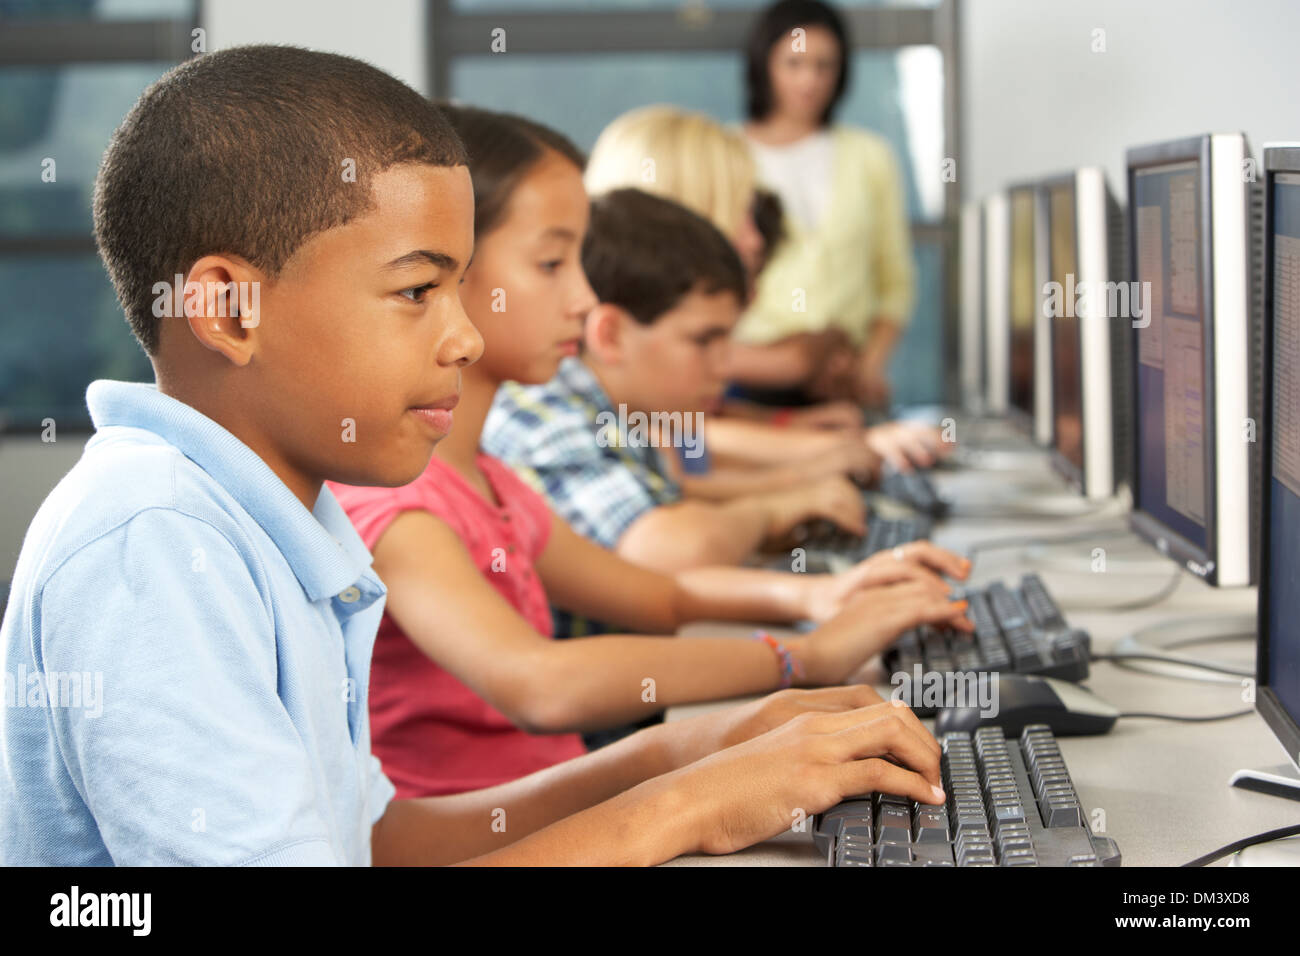 Elementary Students Working At Computers In Classroom Stock Photo